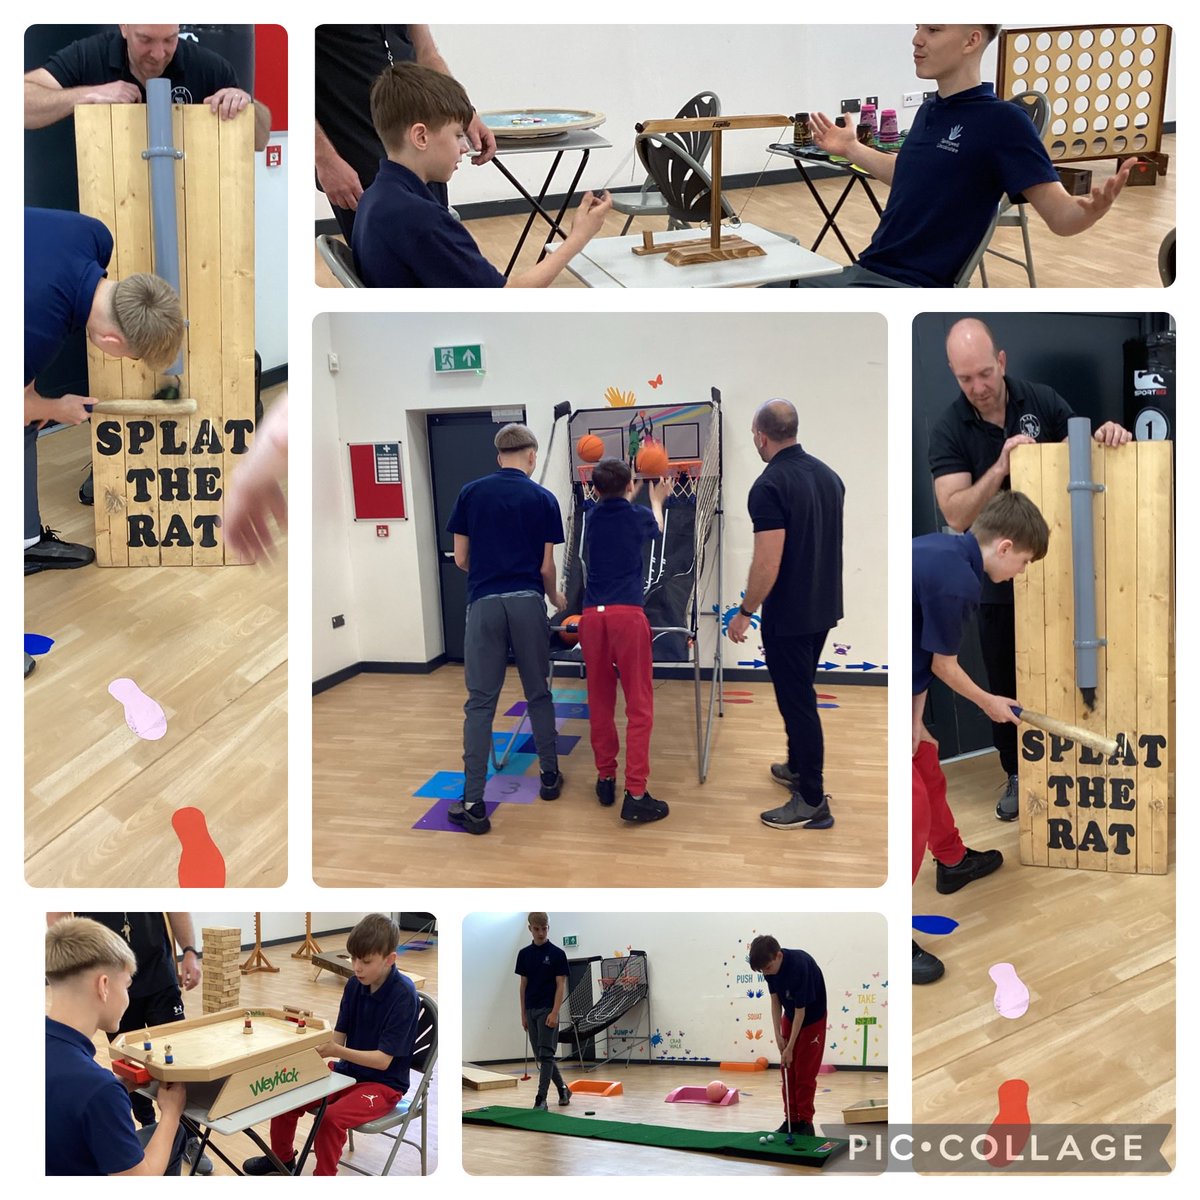 Excellent enrichment today with mr Weaver and Lincolnshire and Notts games hire! We really enjoyed having you in school today! #wemakeadifference